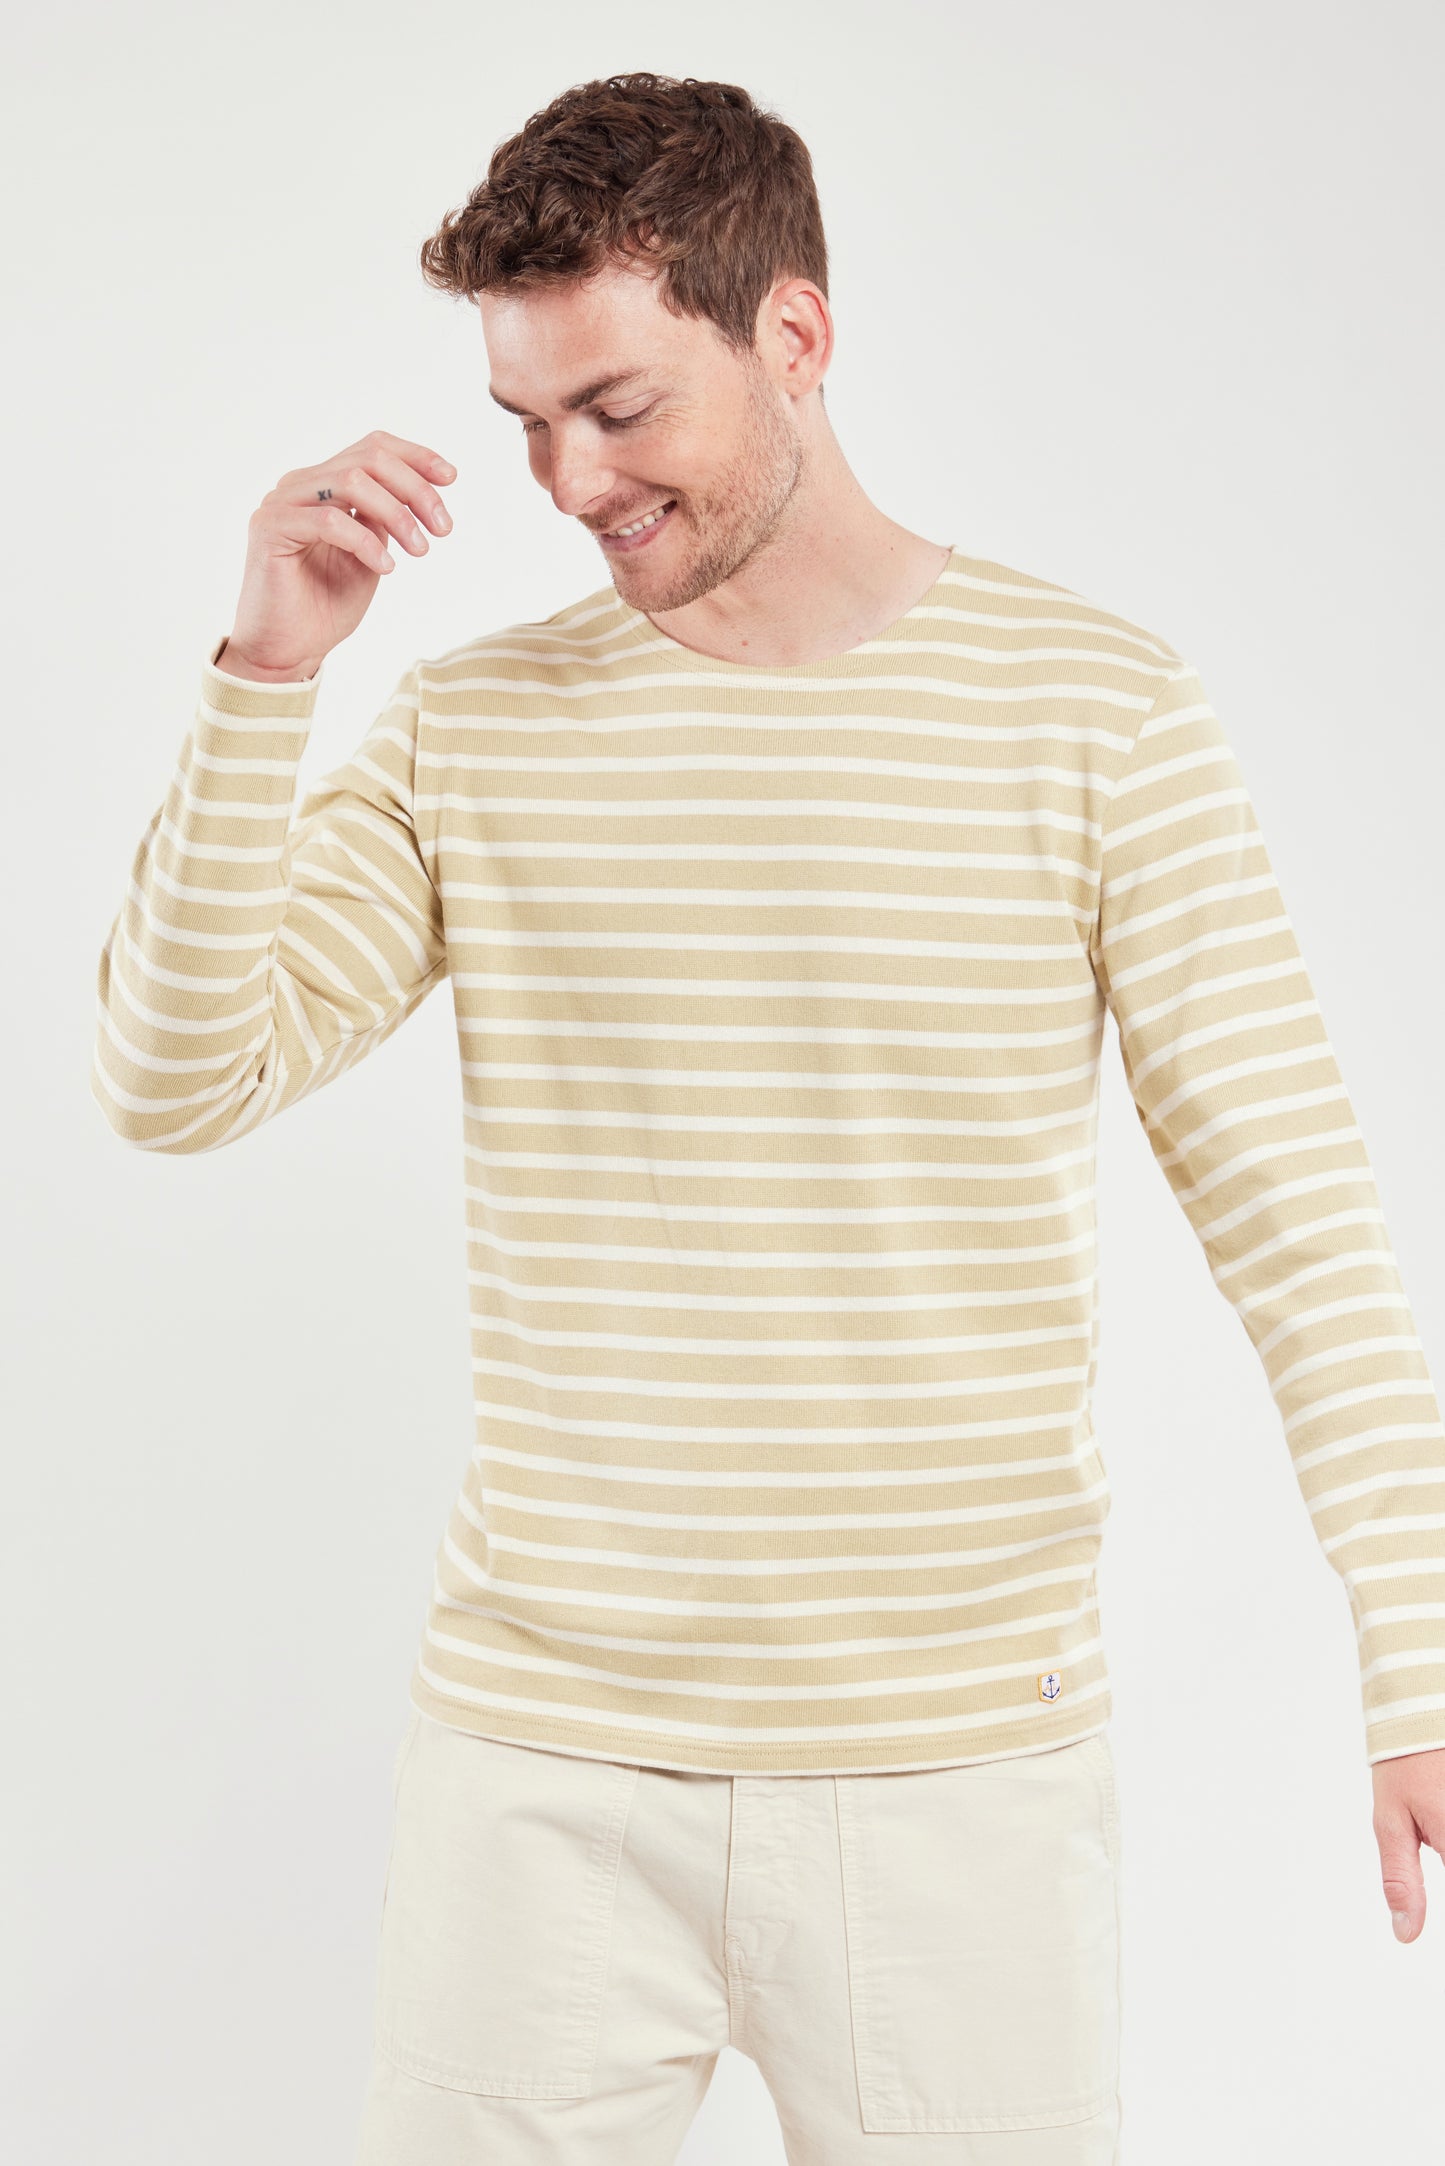 Armor Lux Breton Long Sleeve T-Shirt in Pale Olive and Nature Cream